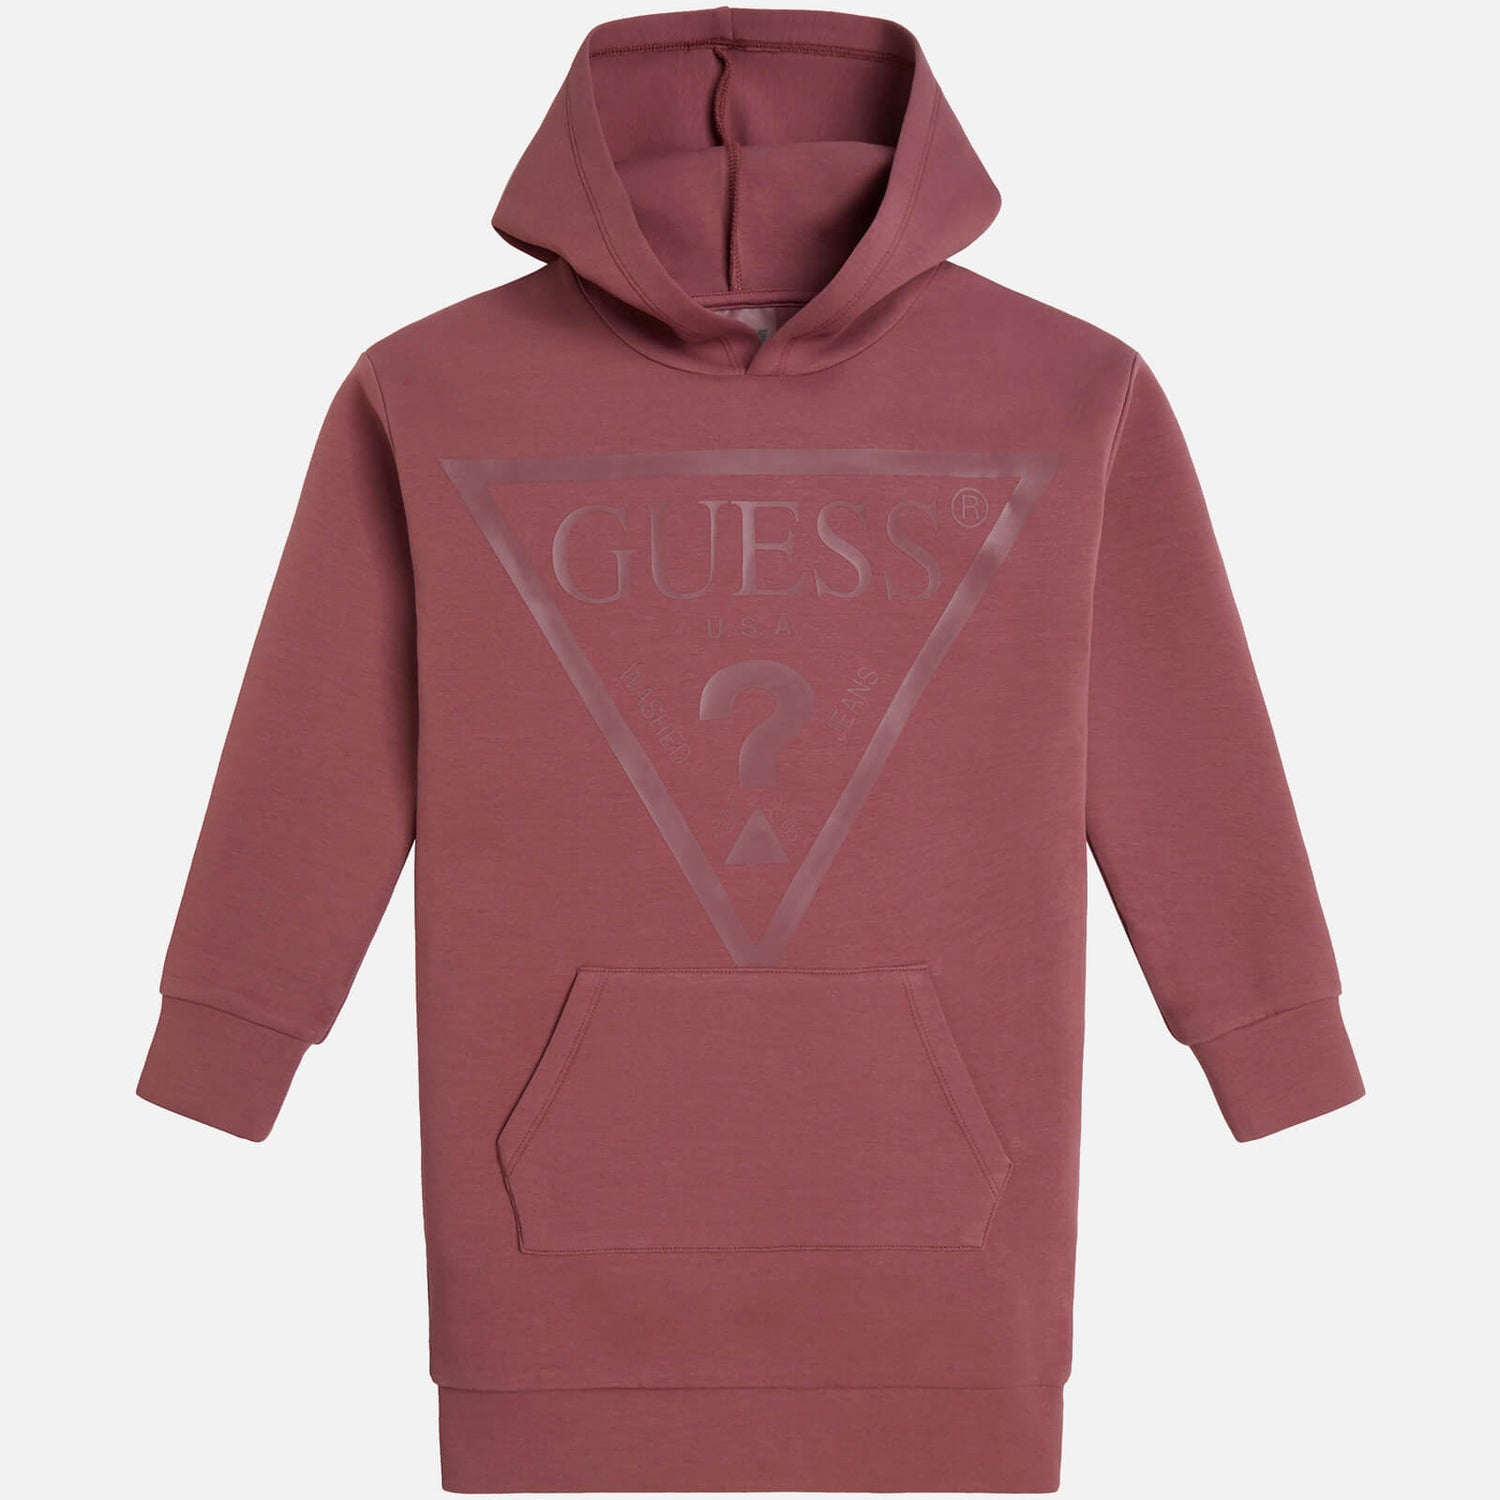 Guess Girls Logo-Printed Cotton-Blend Hooded Dress - 8 Years